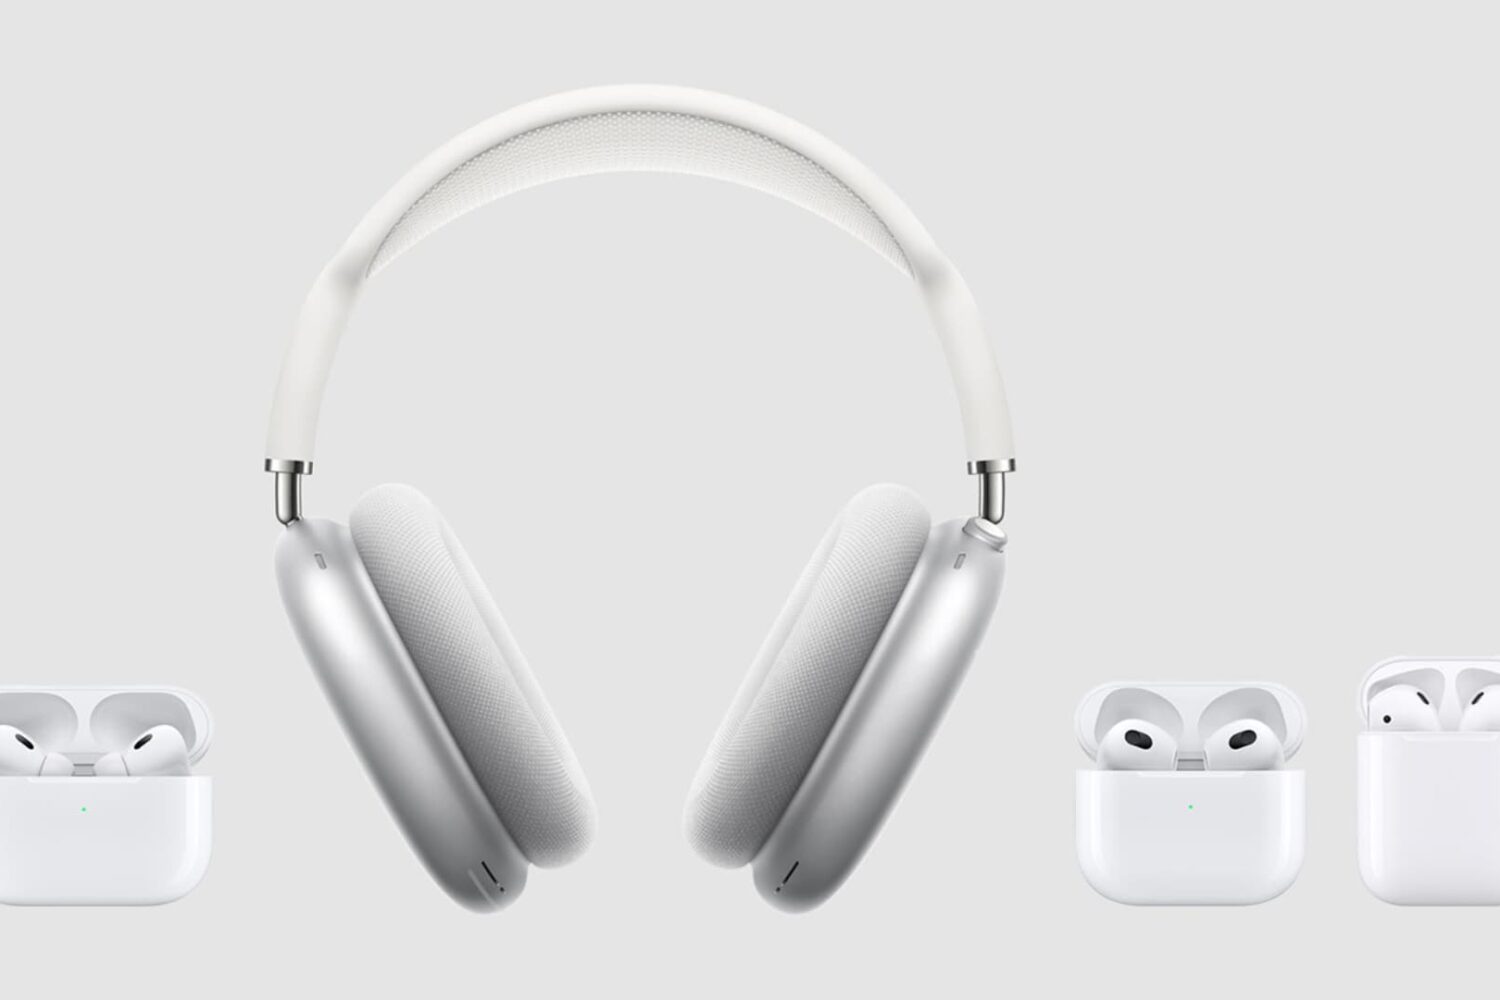 AirPods, AirPods 3rd generation, AirPods Pro, and AirPods Max on a gray background